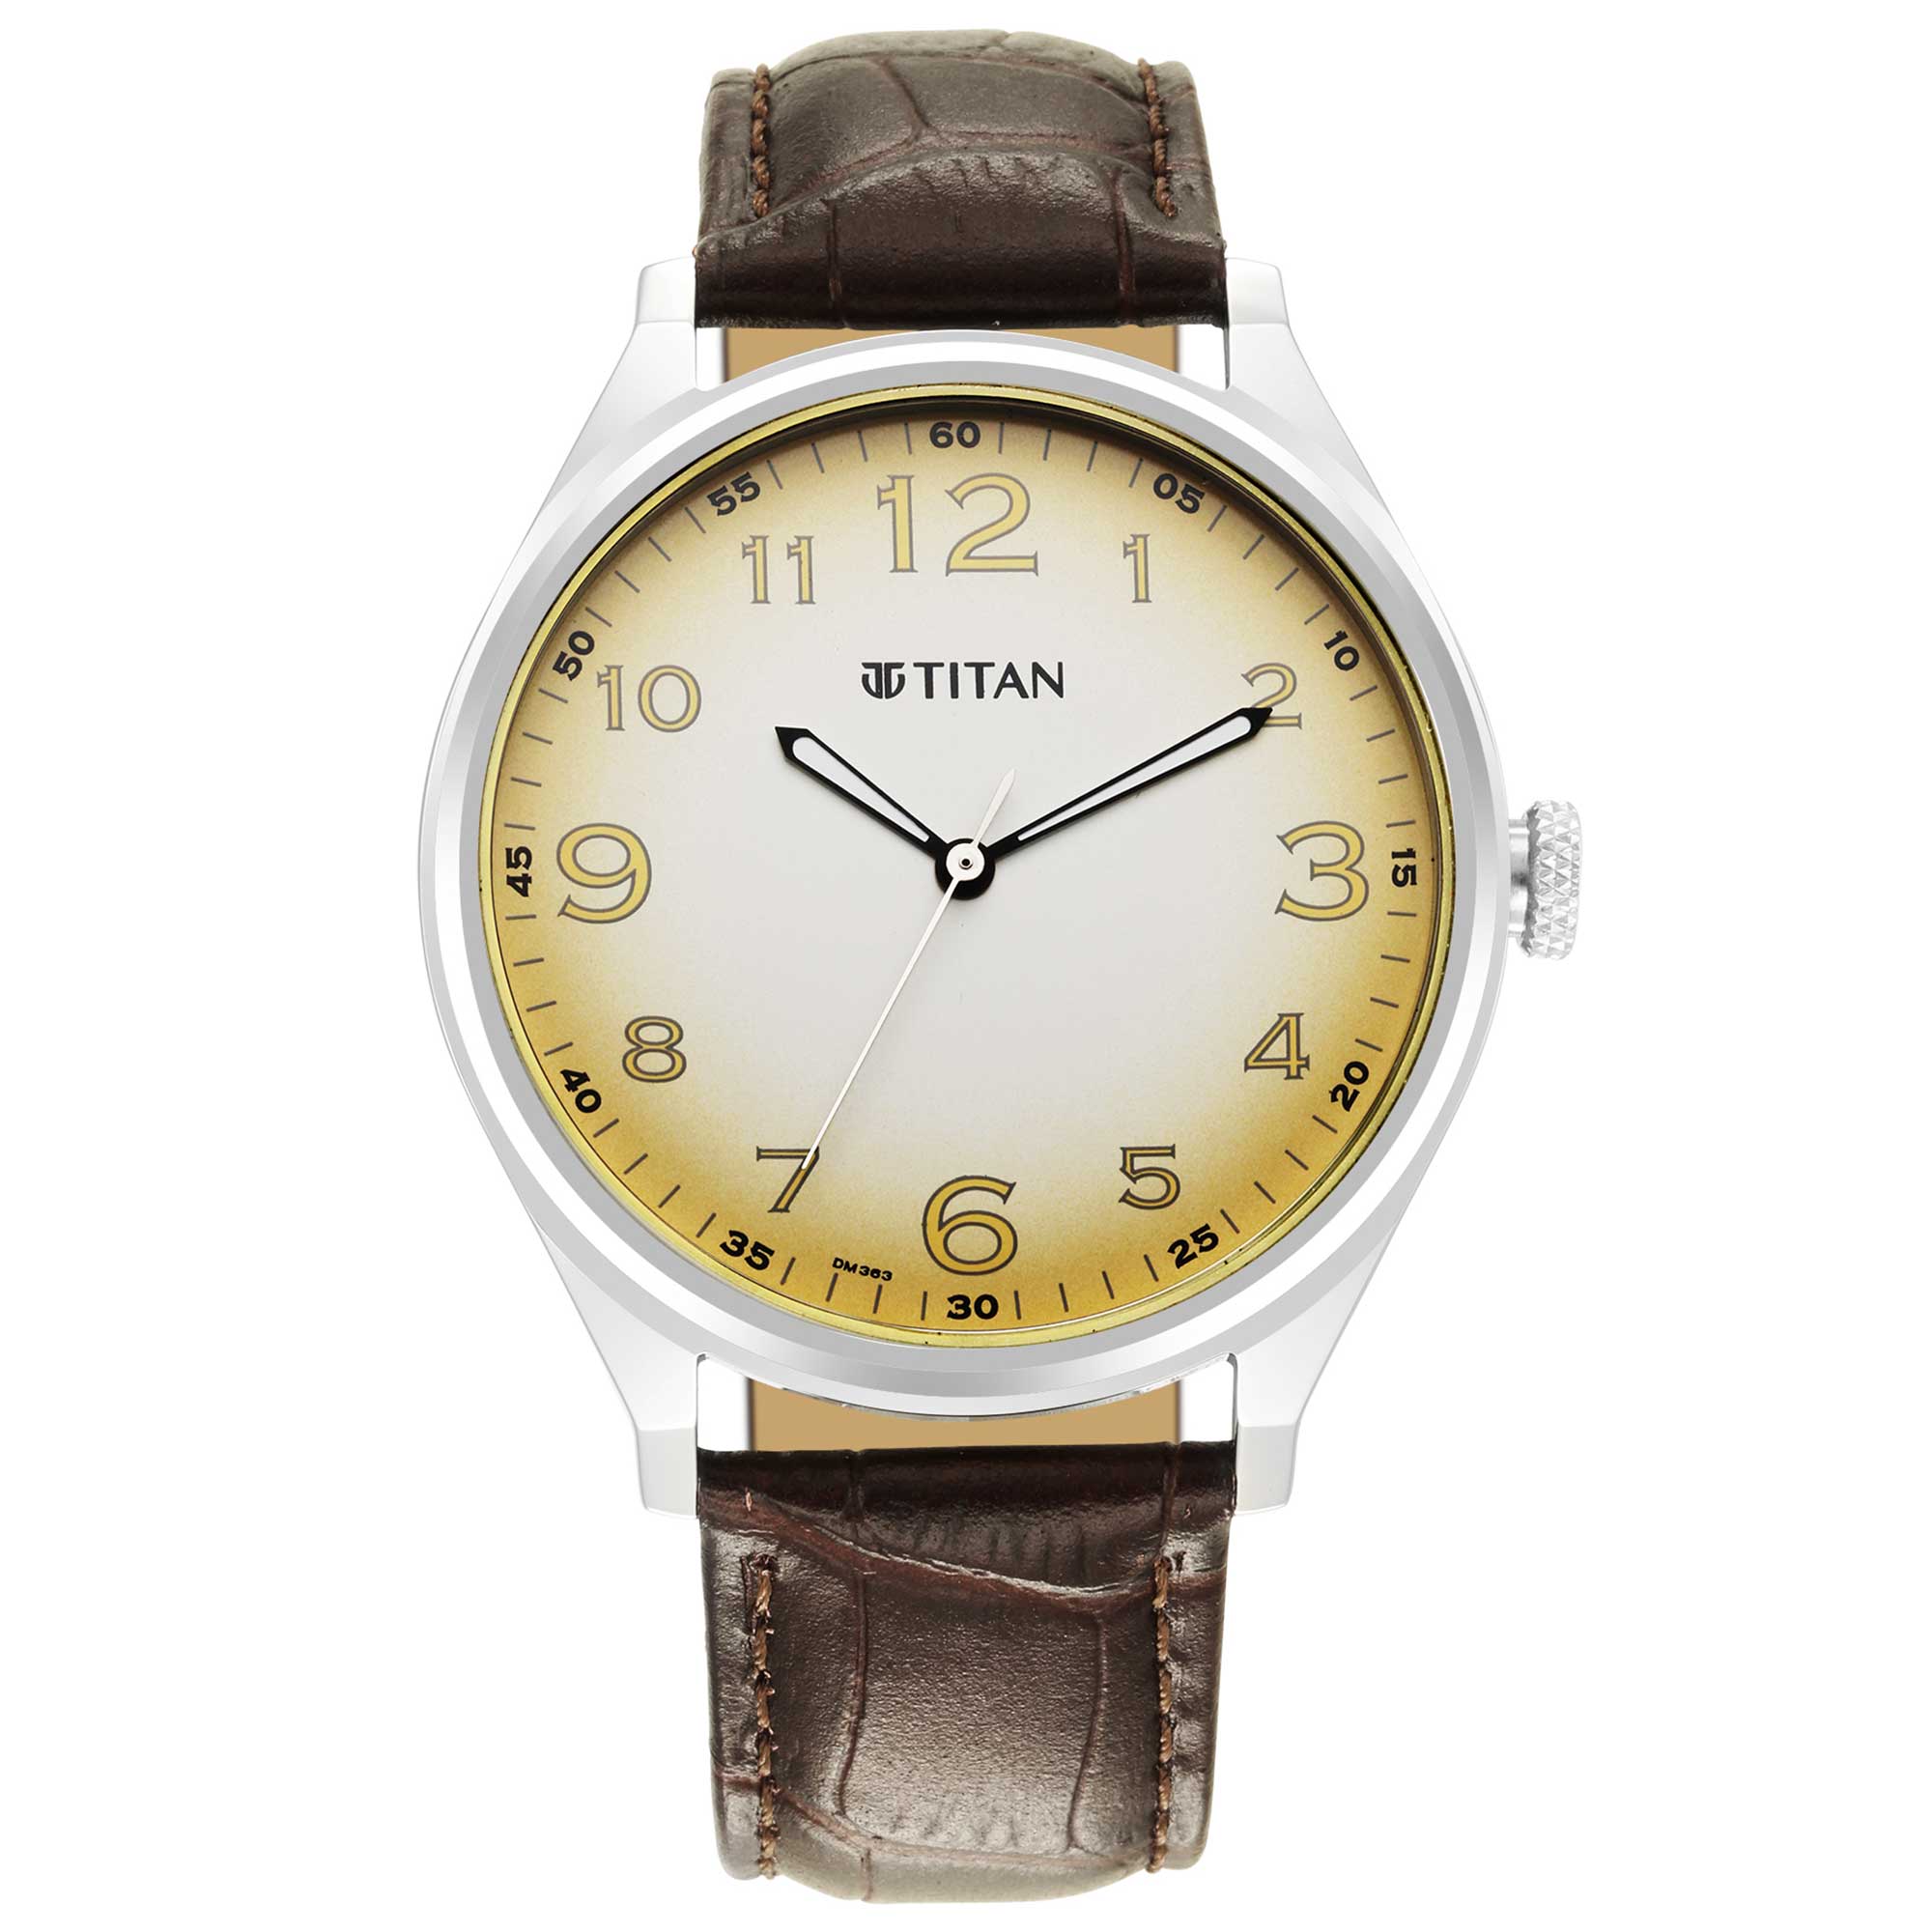 Titan Trendsetters Beige Dial Analog Leather Strap watch for Men